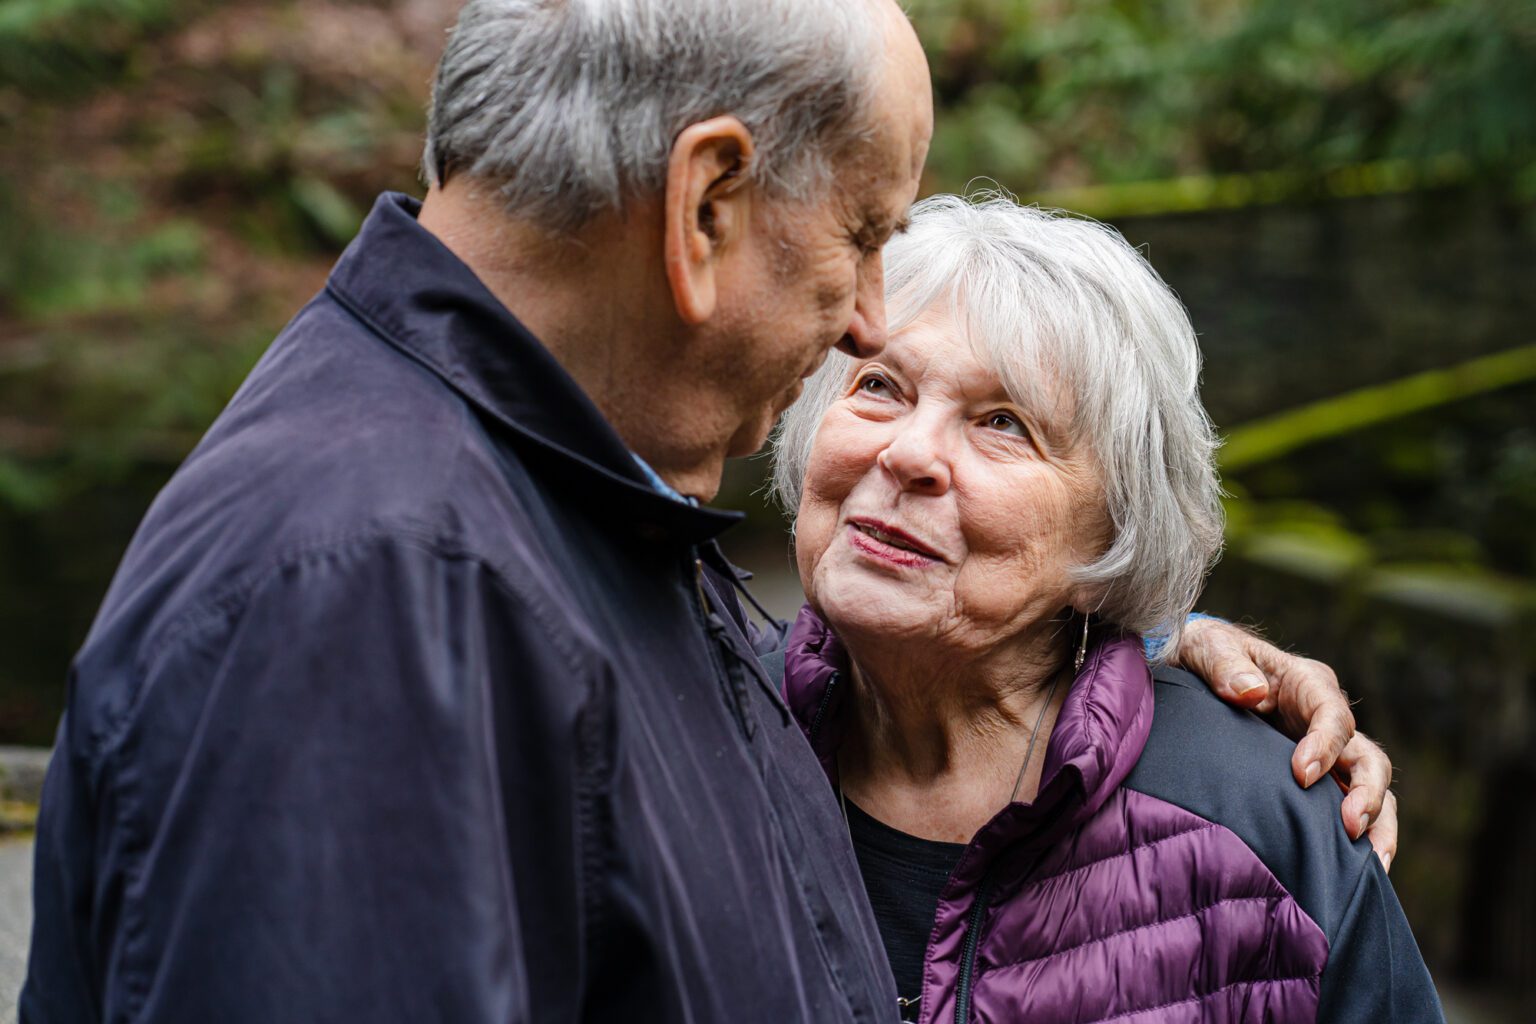 Joan Armstrong, 76, looks at her partner Robert Rome, 78 on Feb. 6 at Whatcom Falls Park. The pair met at the Bellingham Senior Activity Center and have been dating for 10 months.